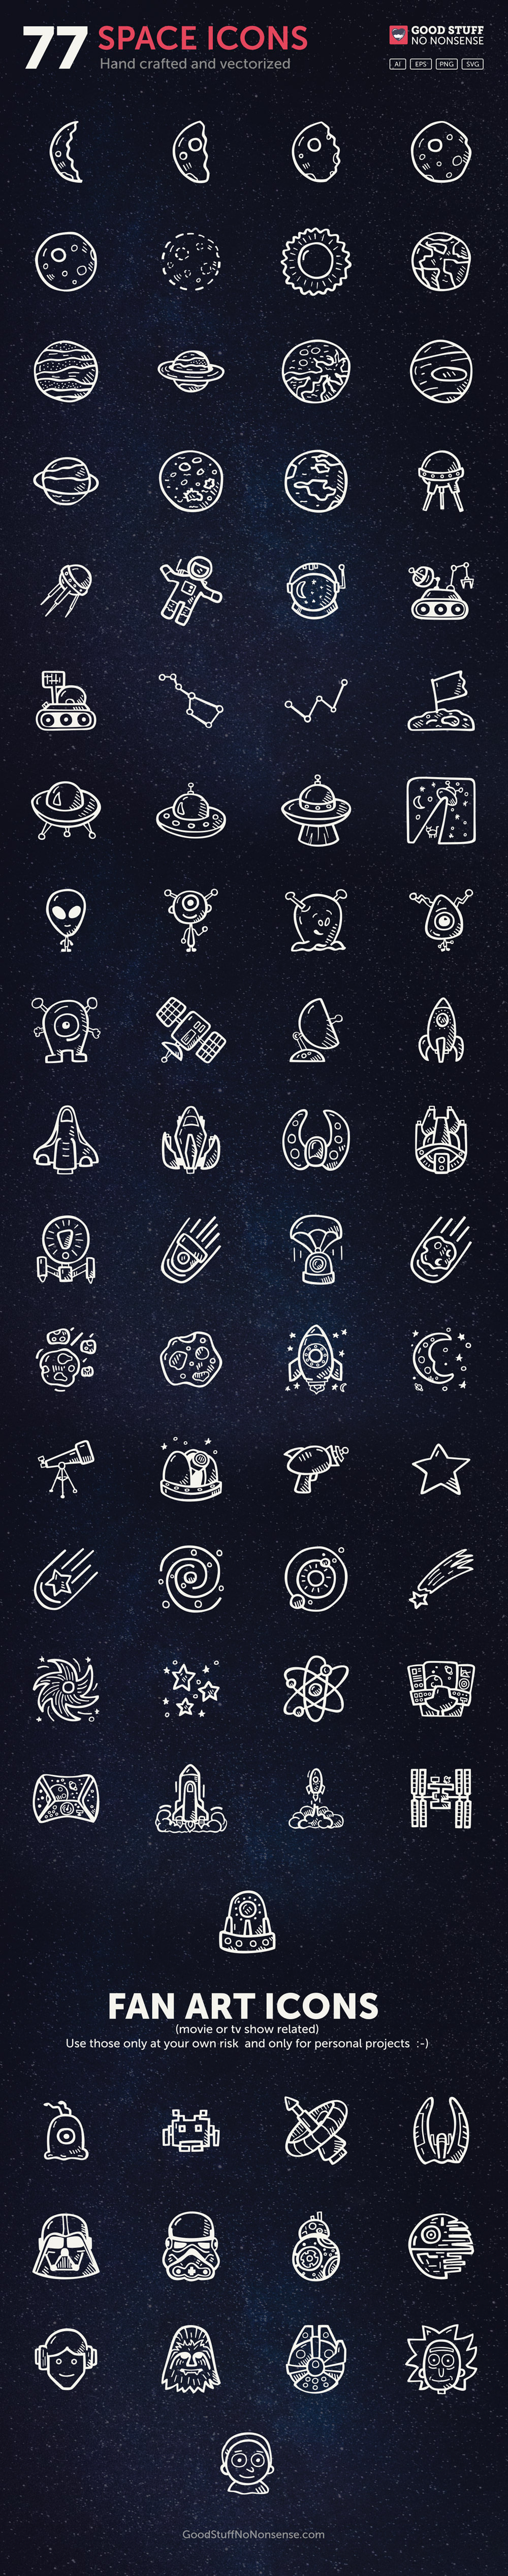 Space Icons Vector Free Collection - Hand Drawn Icons